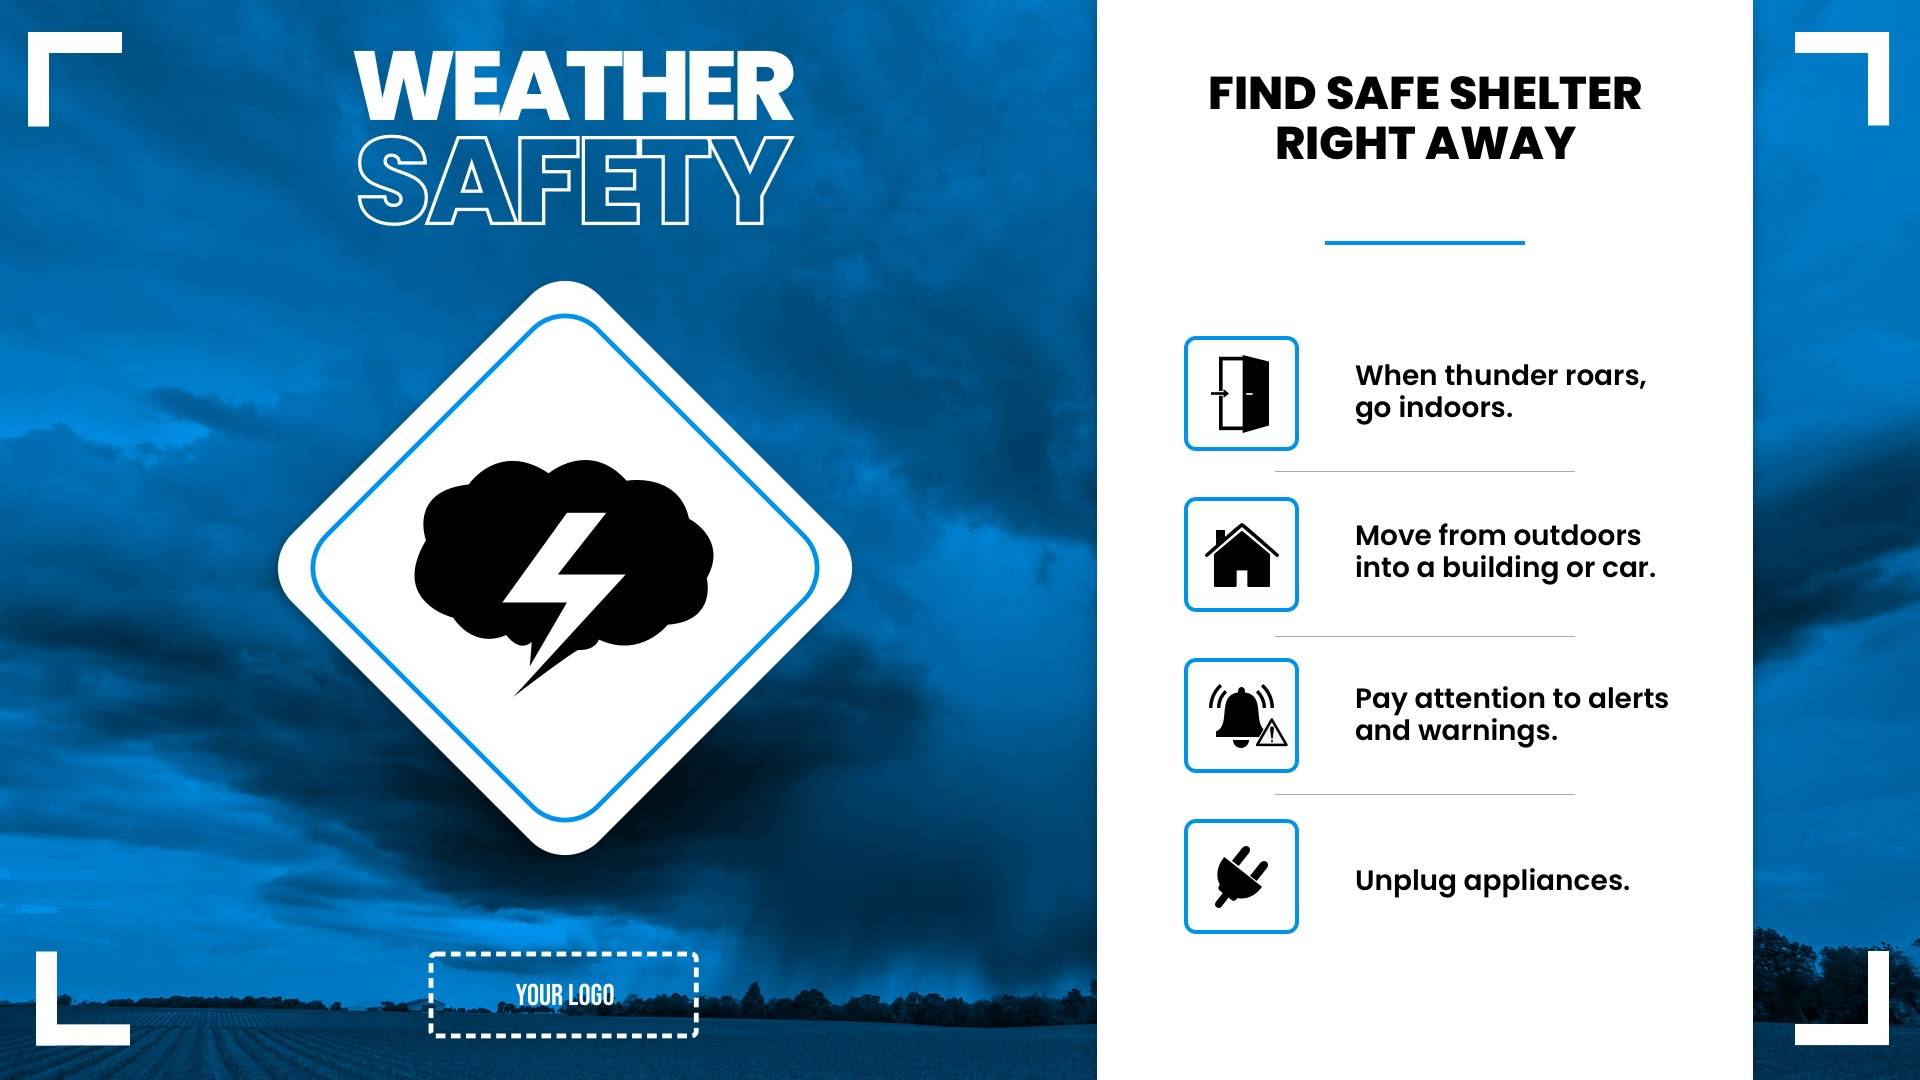 School Safety - Severe Weather Digital Signage Template